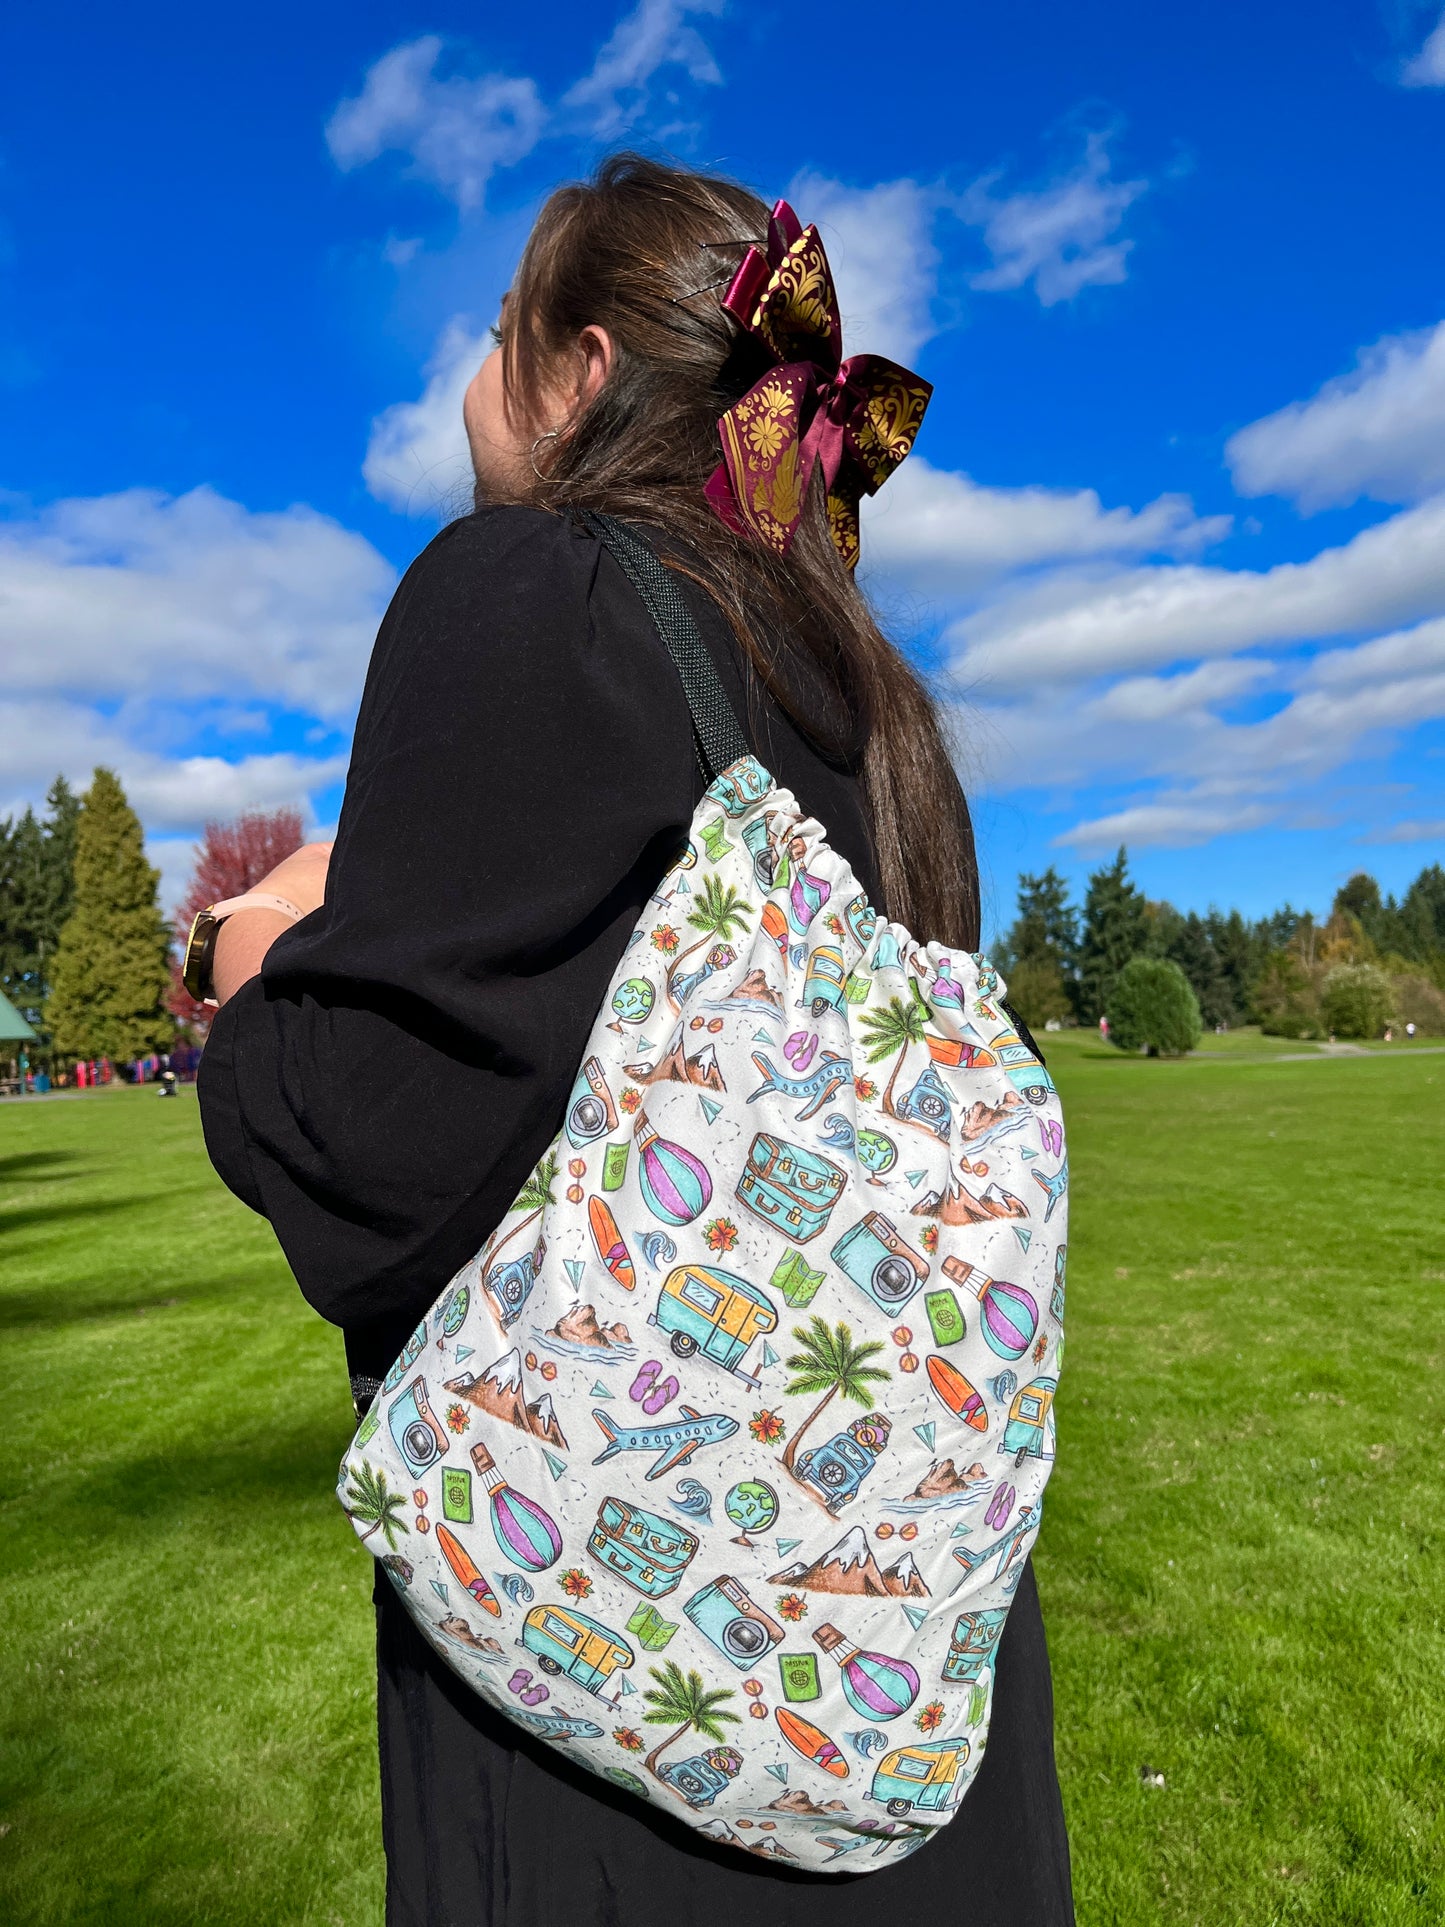 Travel pattern Beach Towel Backpack - 2-in-1 Sand-Free, Quick-Dry, & Versatile!